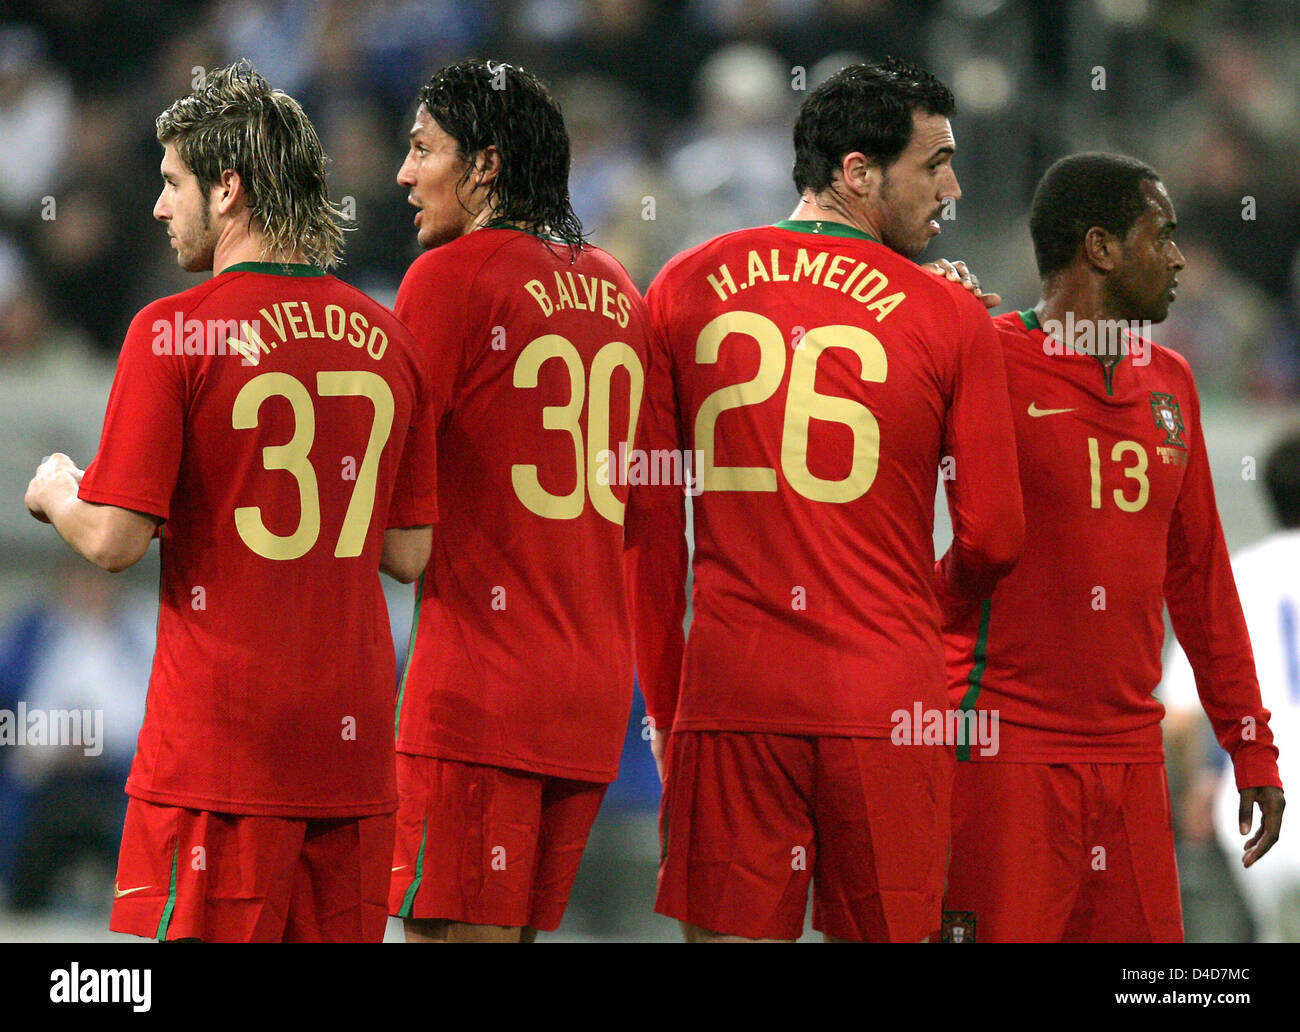 (L-R) Portugal's Miguel Veloso, Bruno Alves, Hugo Almeida and Miguel line up to form a wall in the test cap Portugal v Greece at LTU Arena stadium in Duesseldorf, Germany, 26 March 2008. Greece defeated Portugal 2-1. Photo: Federico Gambarini Stock Photo